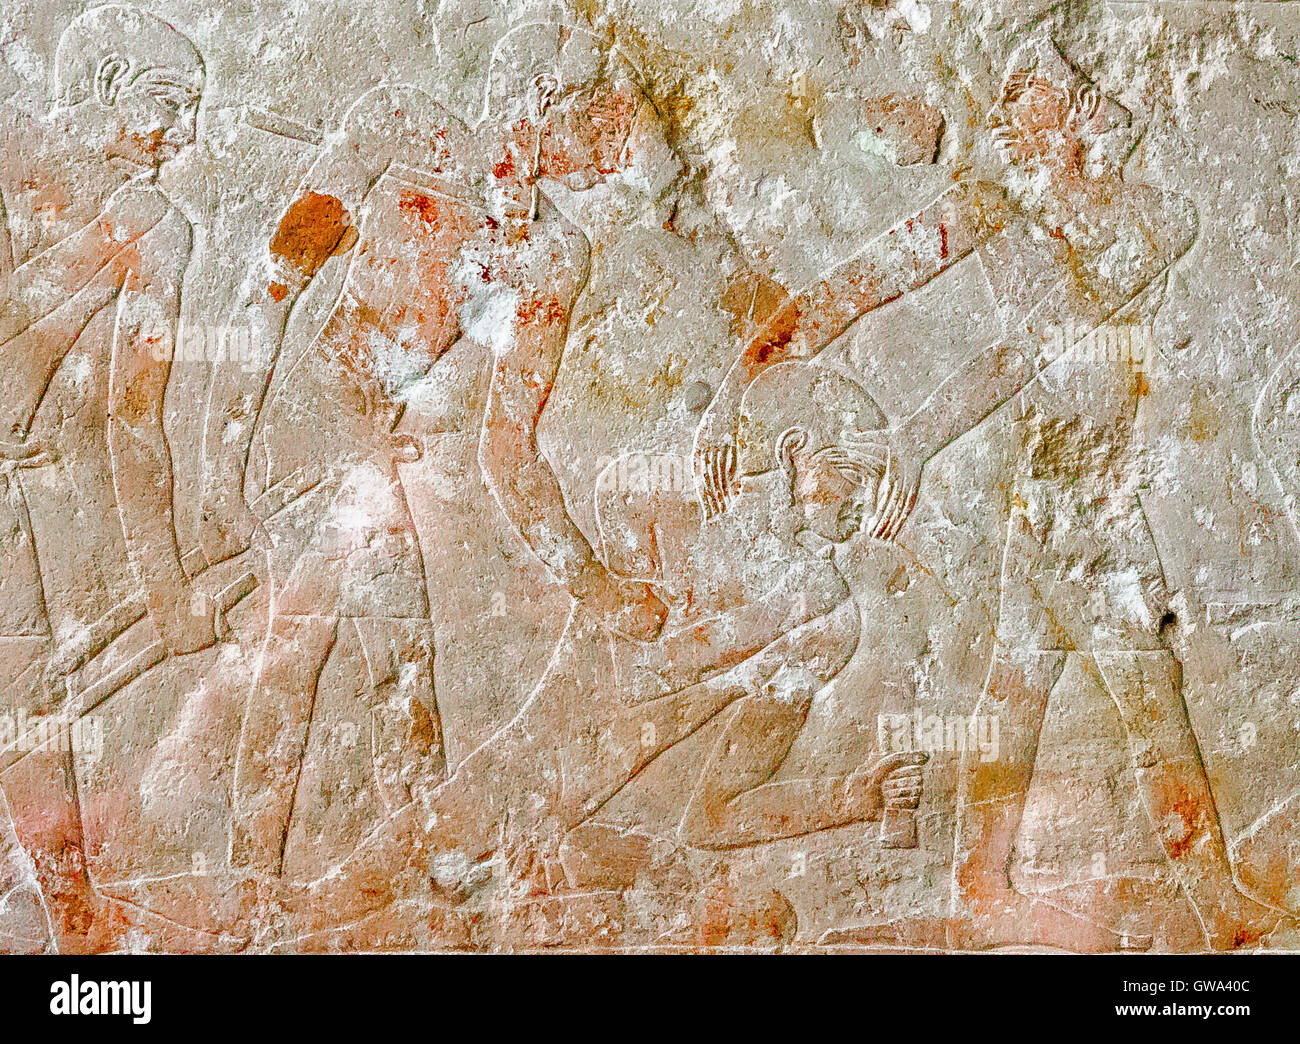 Egypt, Cairo, Egyptian Museum, from the tomb of Kaemrehu, Saqqara, detail of a big relief depicting agricultural scenes. Stock Photo